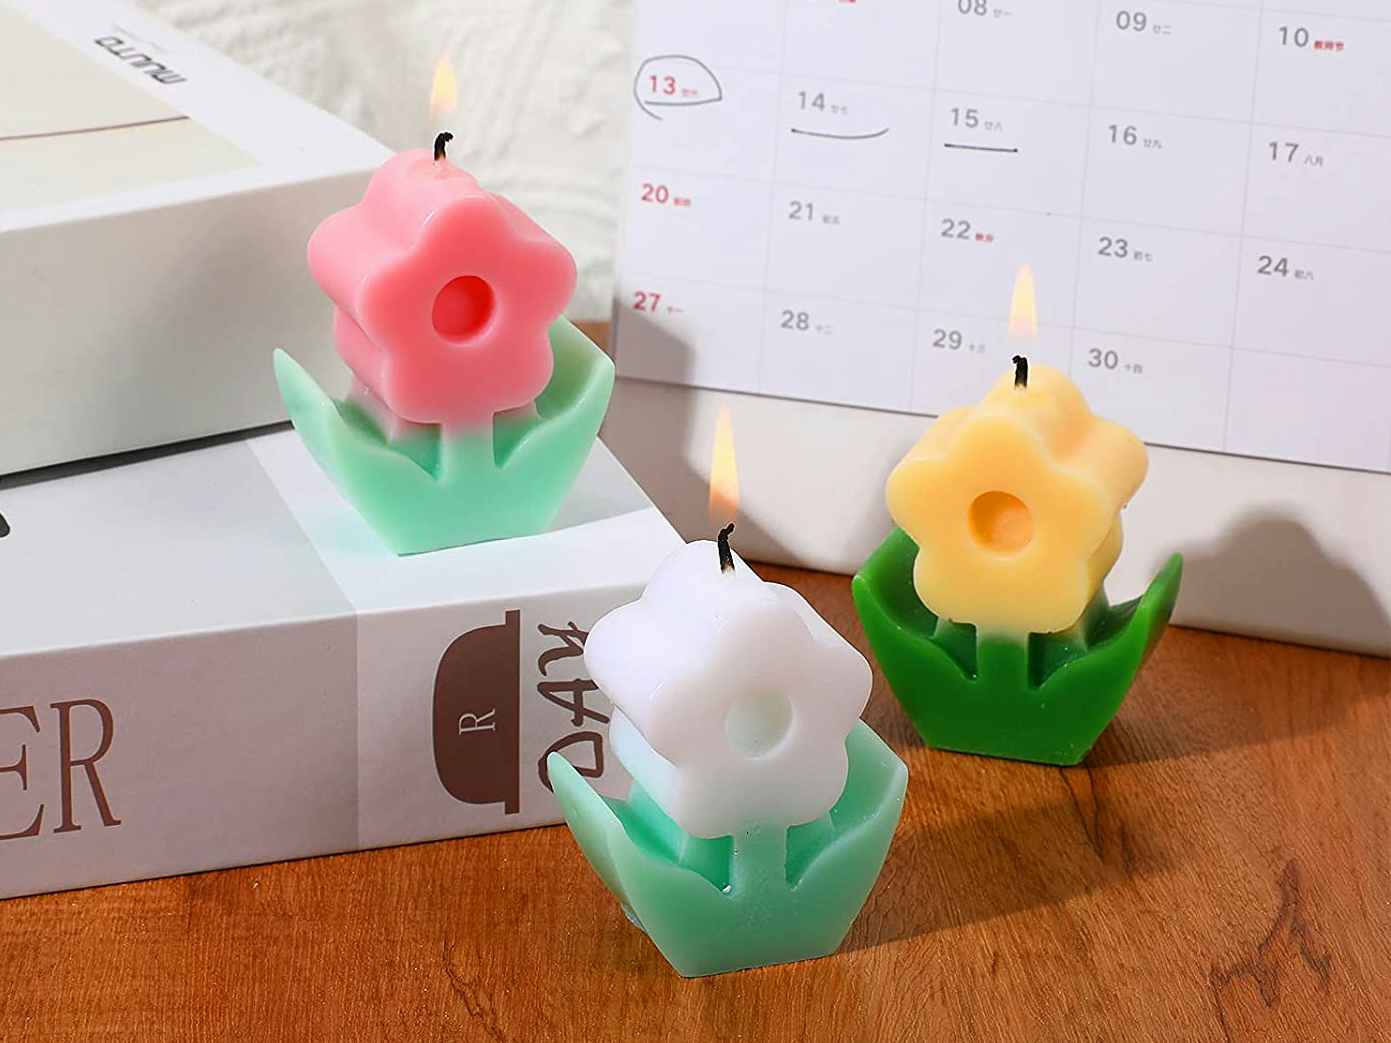 best stocking stuffer ideas - Three flower shaped candles with their wicks lit